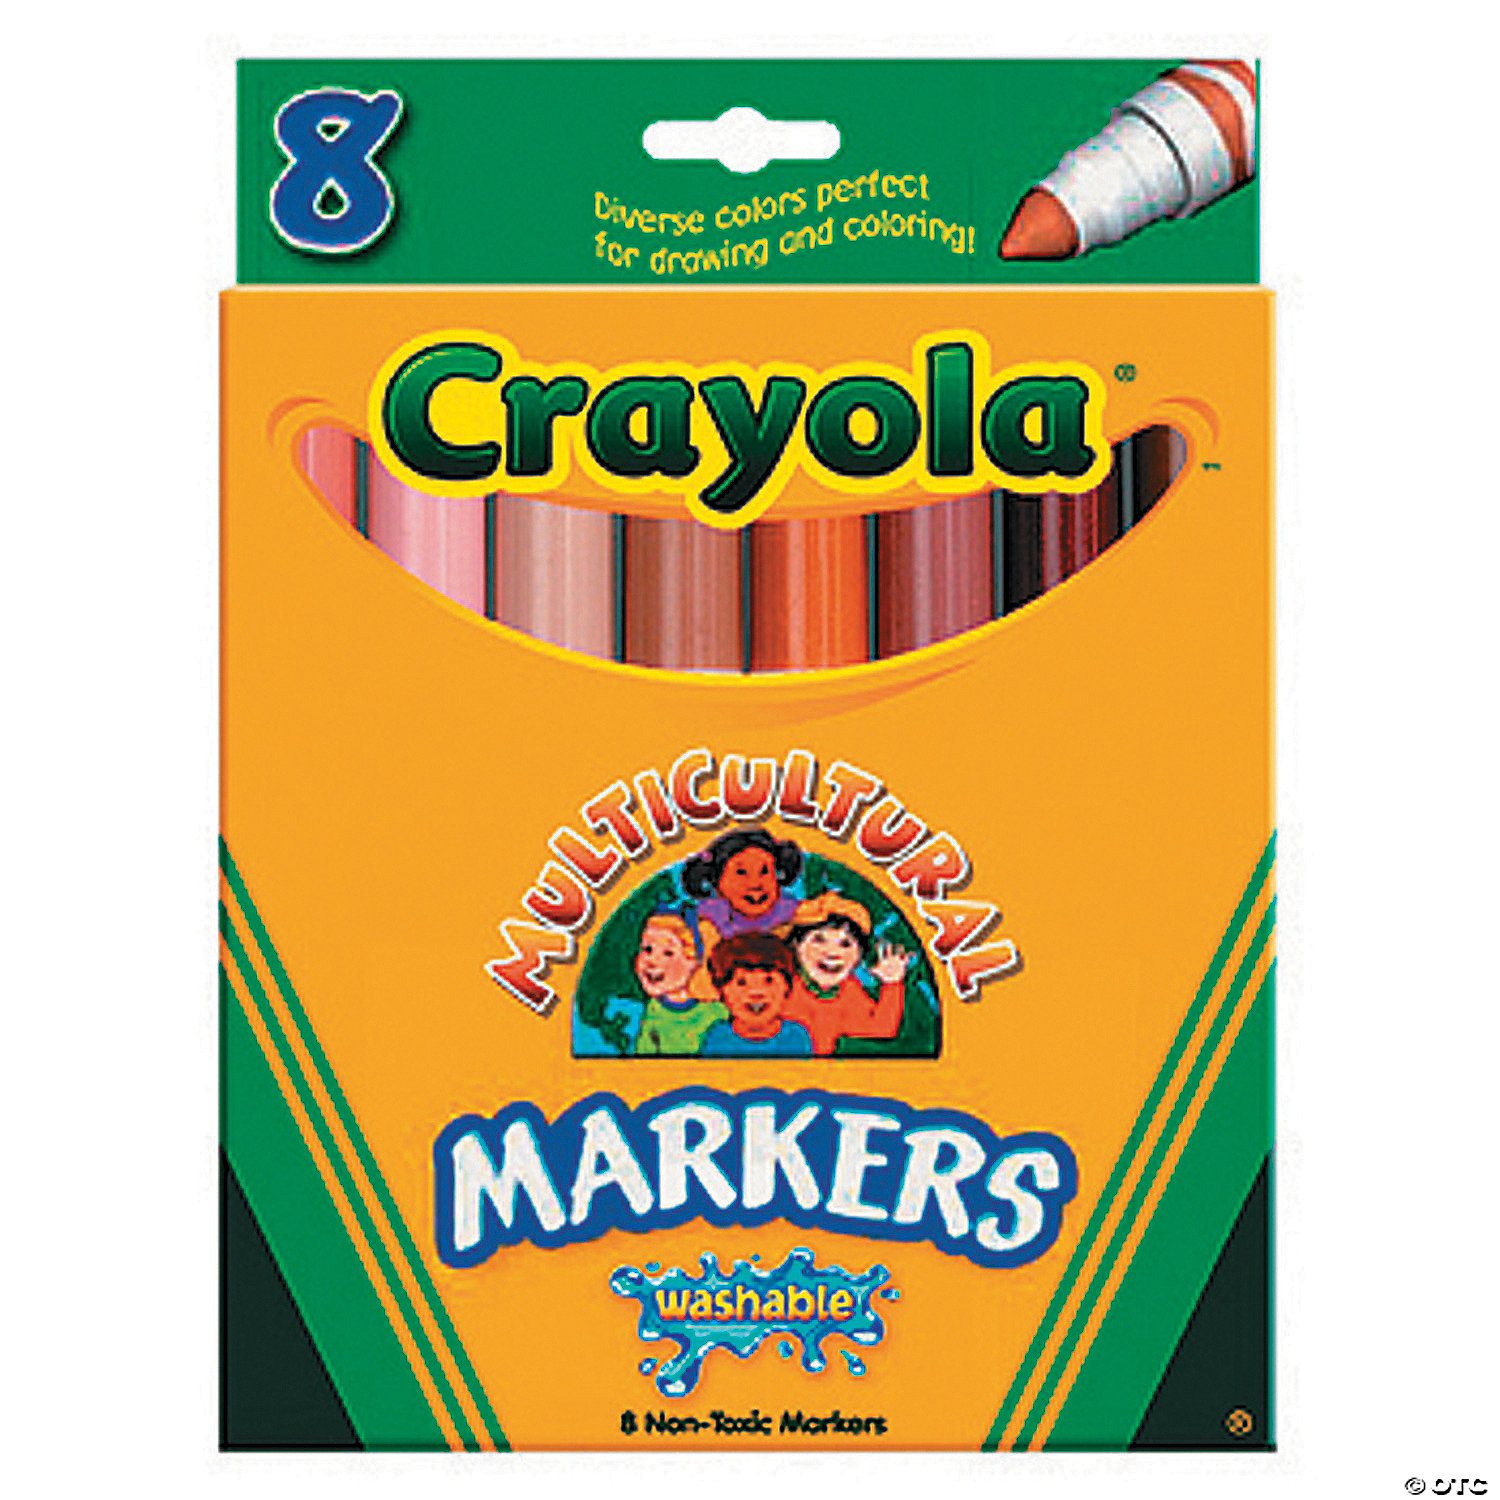 8-Color Crayola® Multicultural Markers